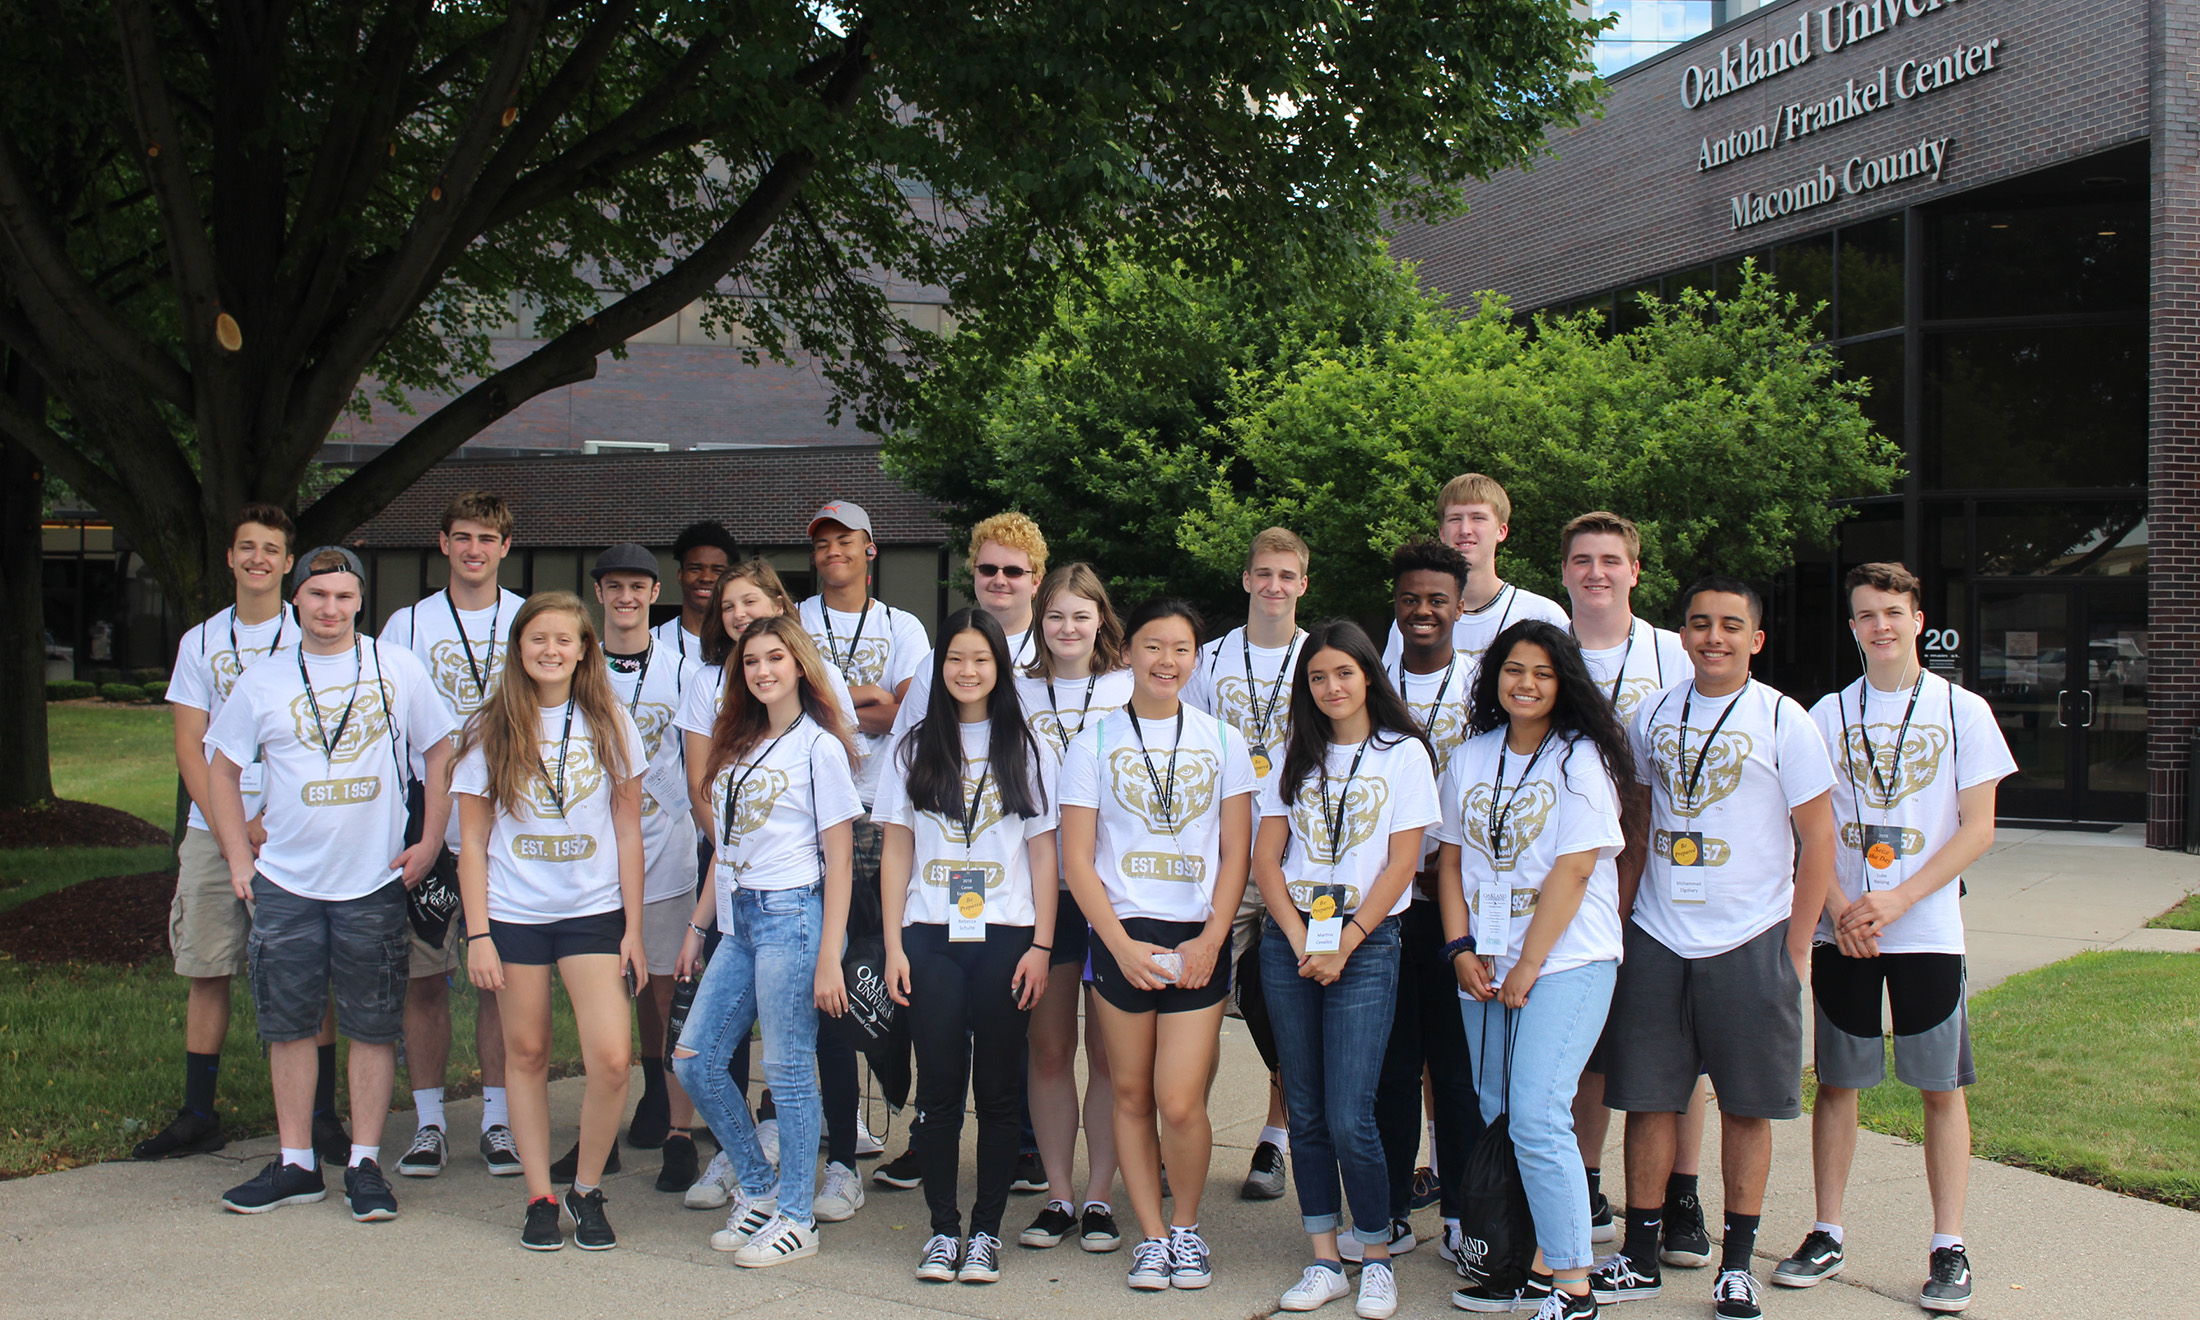 Registration underway for UNIVERSITY’S 2019 SUMMER CAREER CAMPS -2019 - Macomb County - News